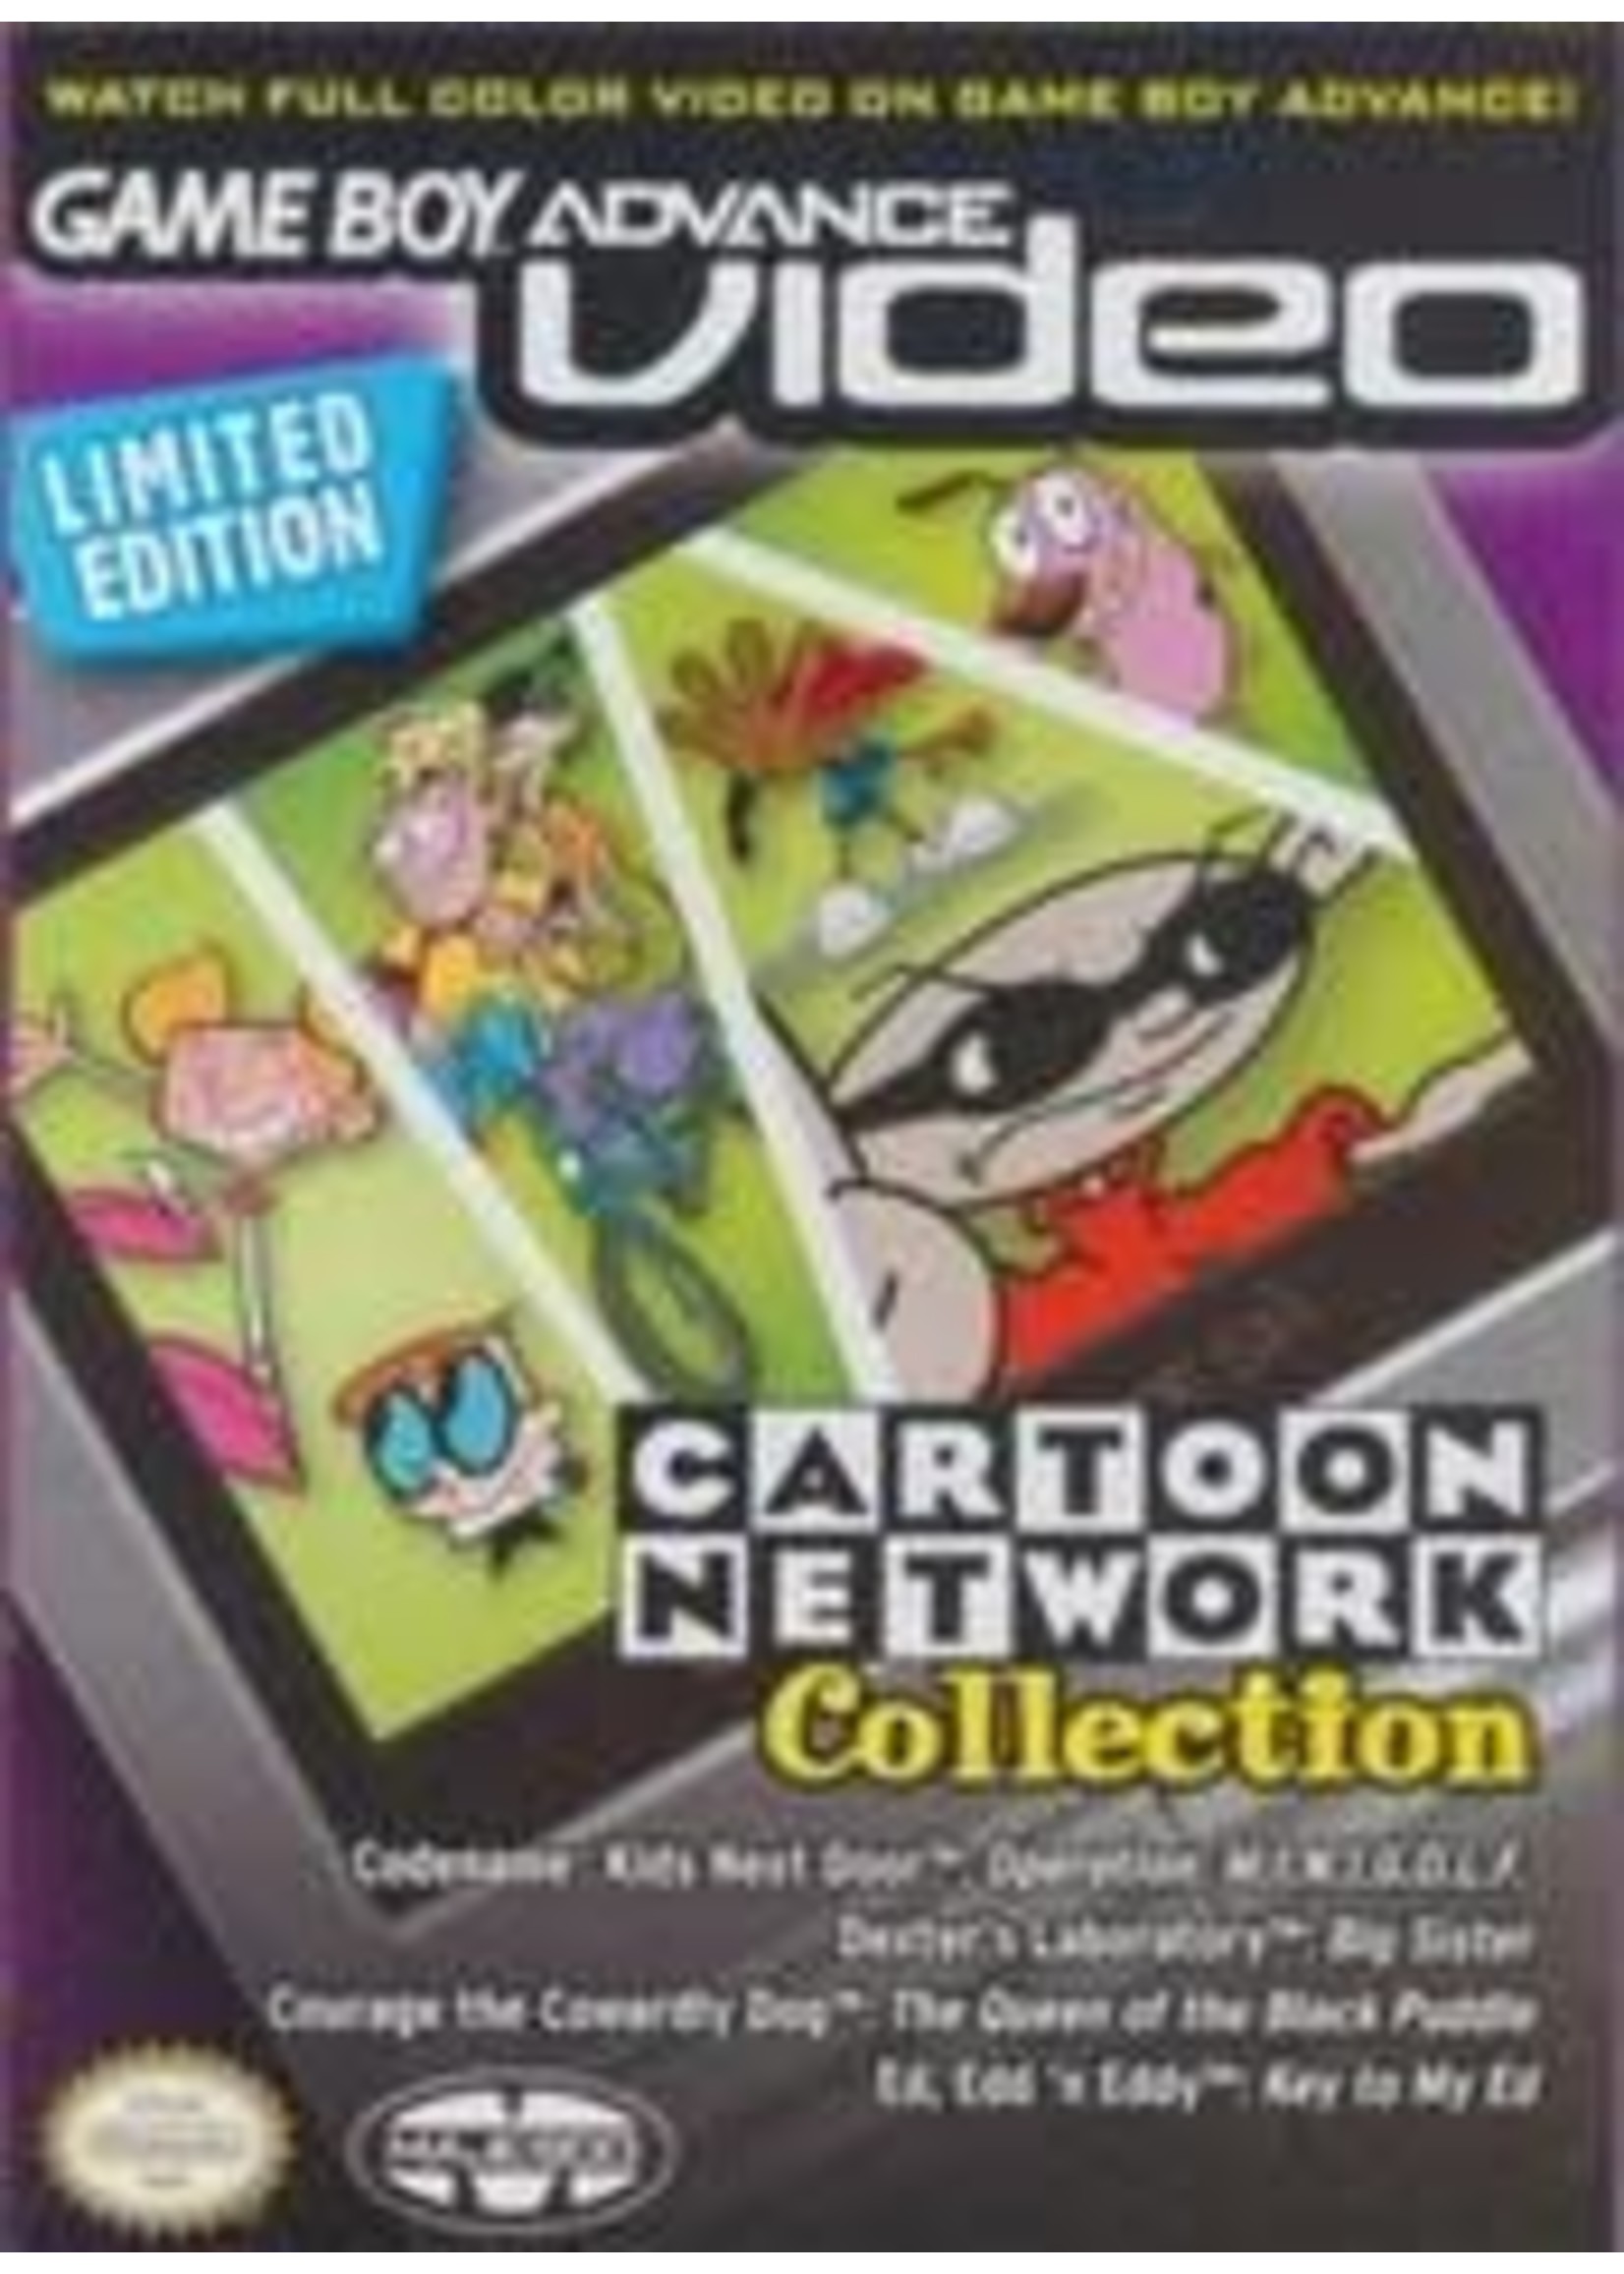 GBA Video Cartoon Network Collection Limited Edition GameBoy Advance